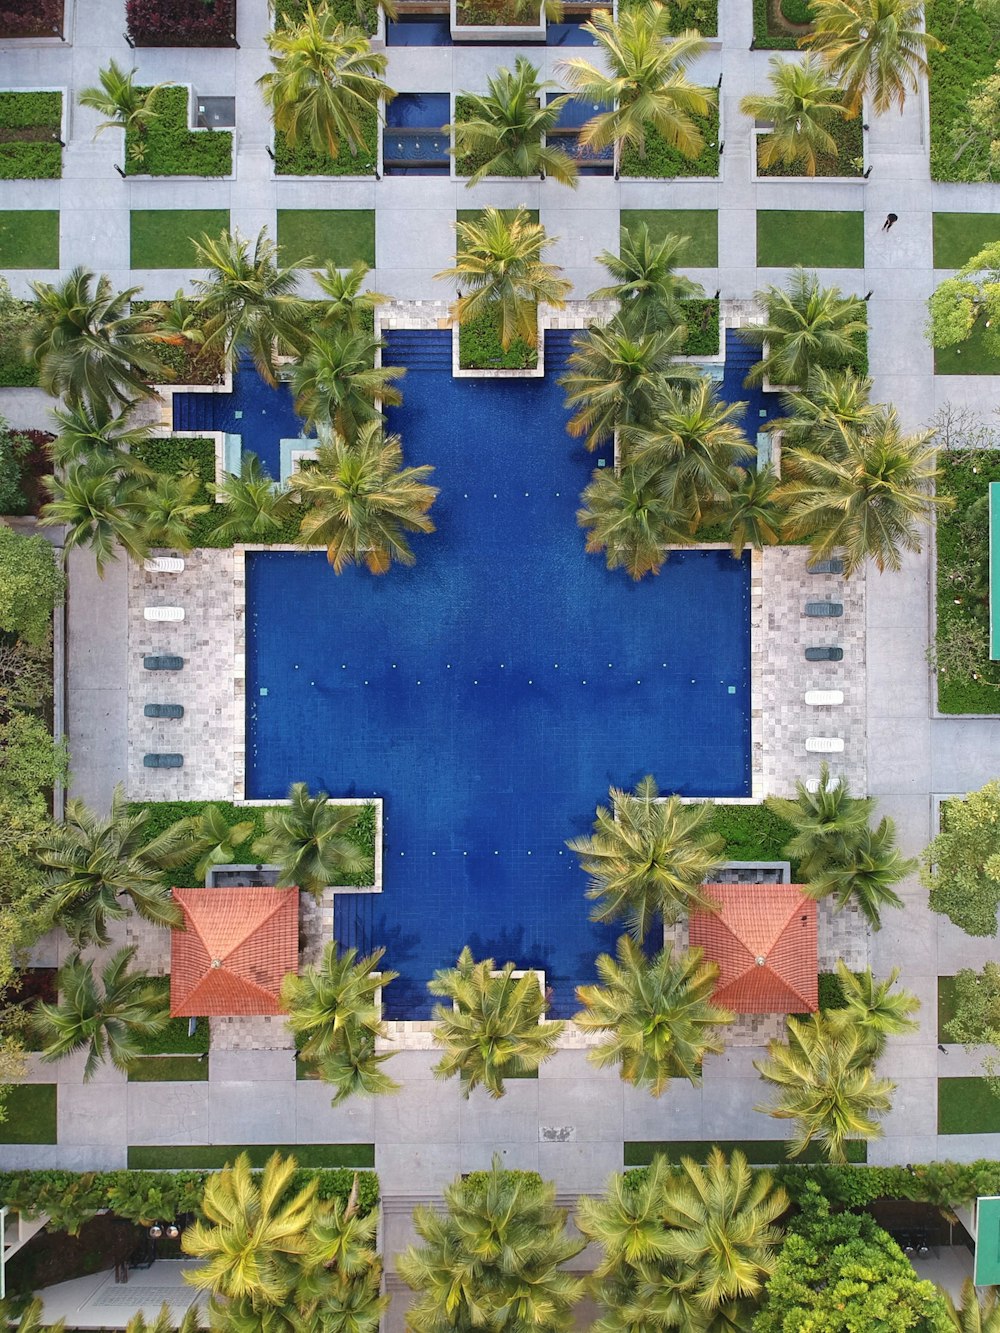 aerial view of pool surrounded by palm trees